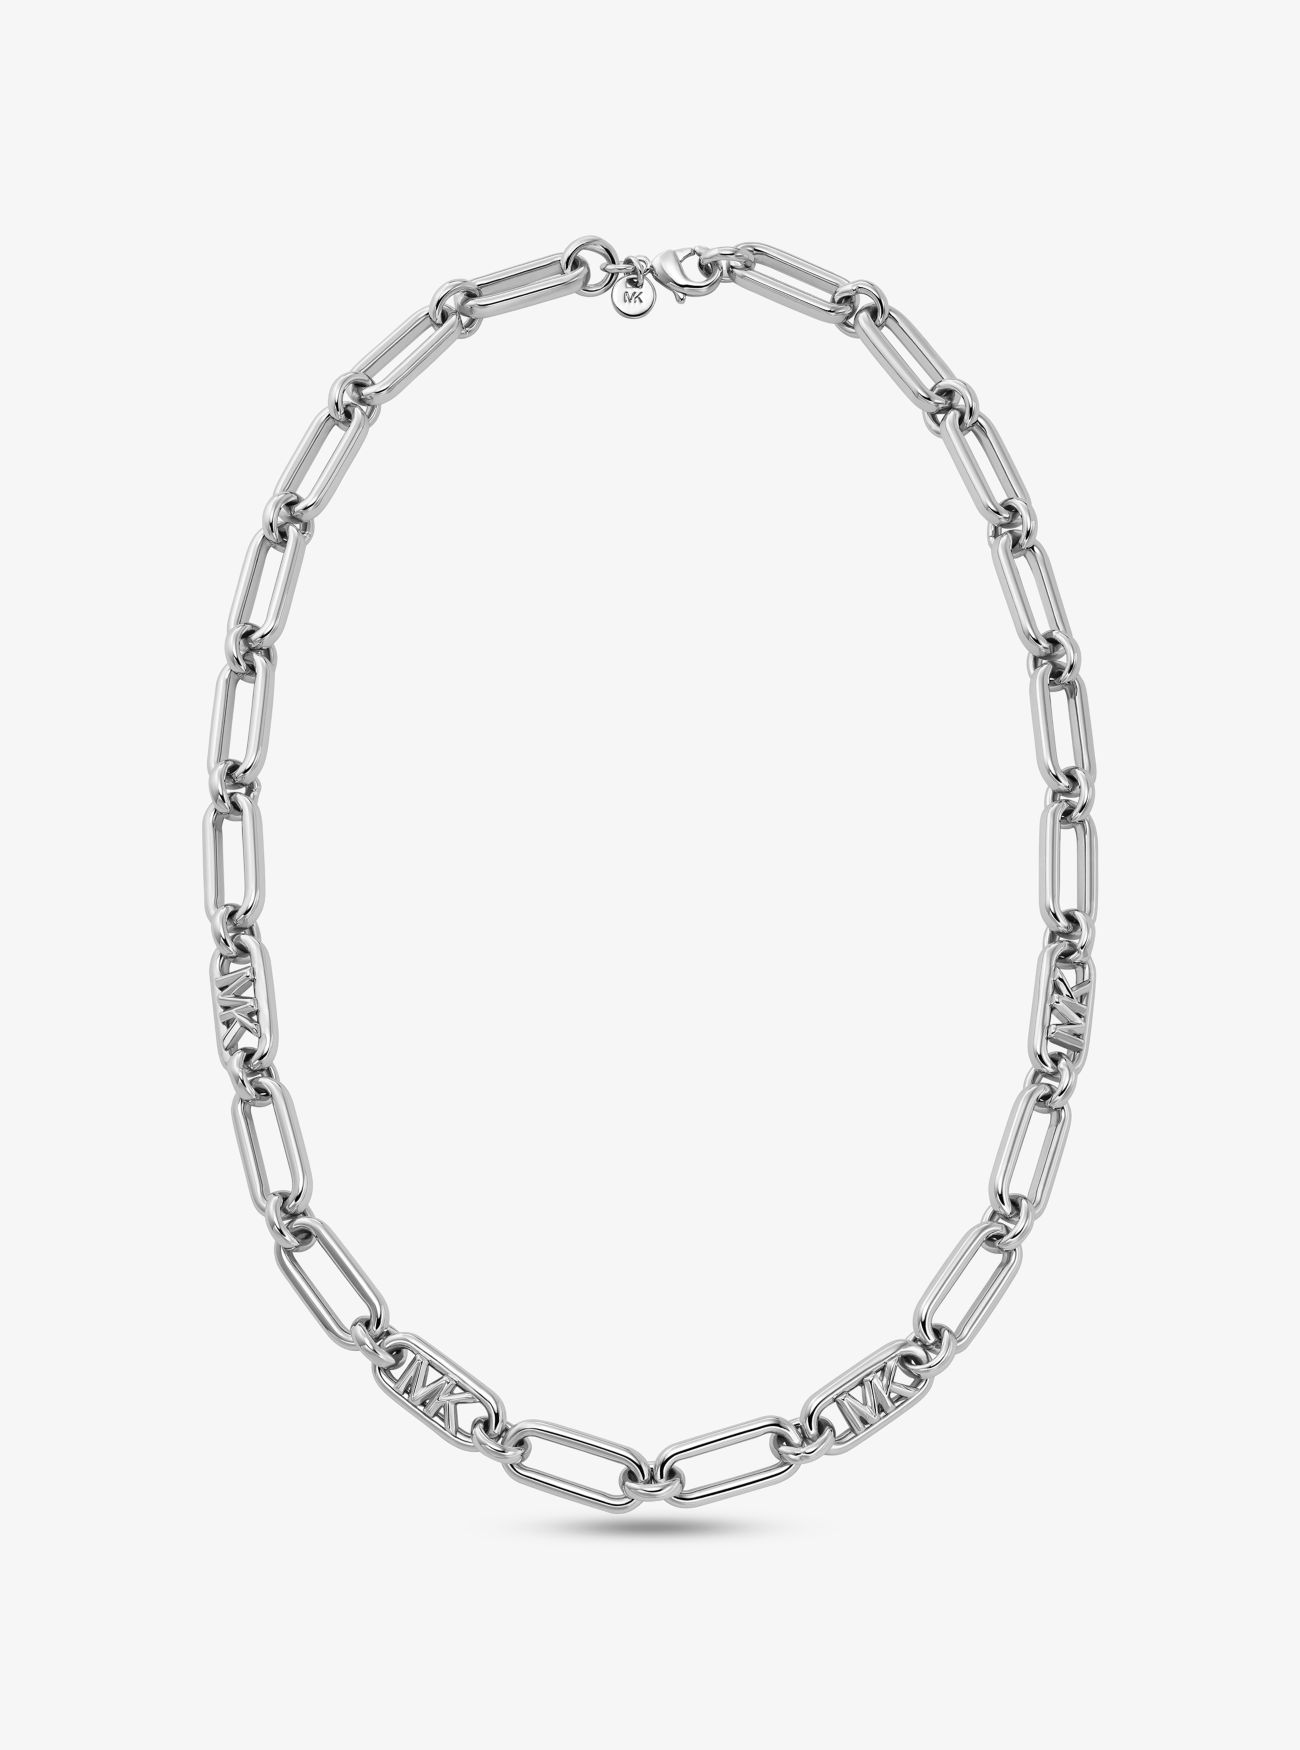 MK Precious Metal-Plated Brass Chain Link Necklace - Silver - Michael Kors